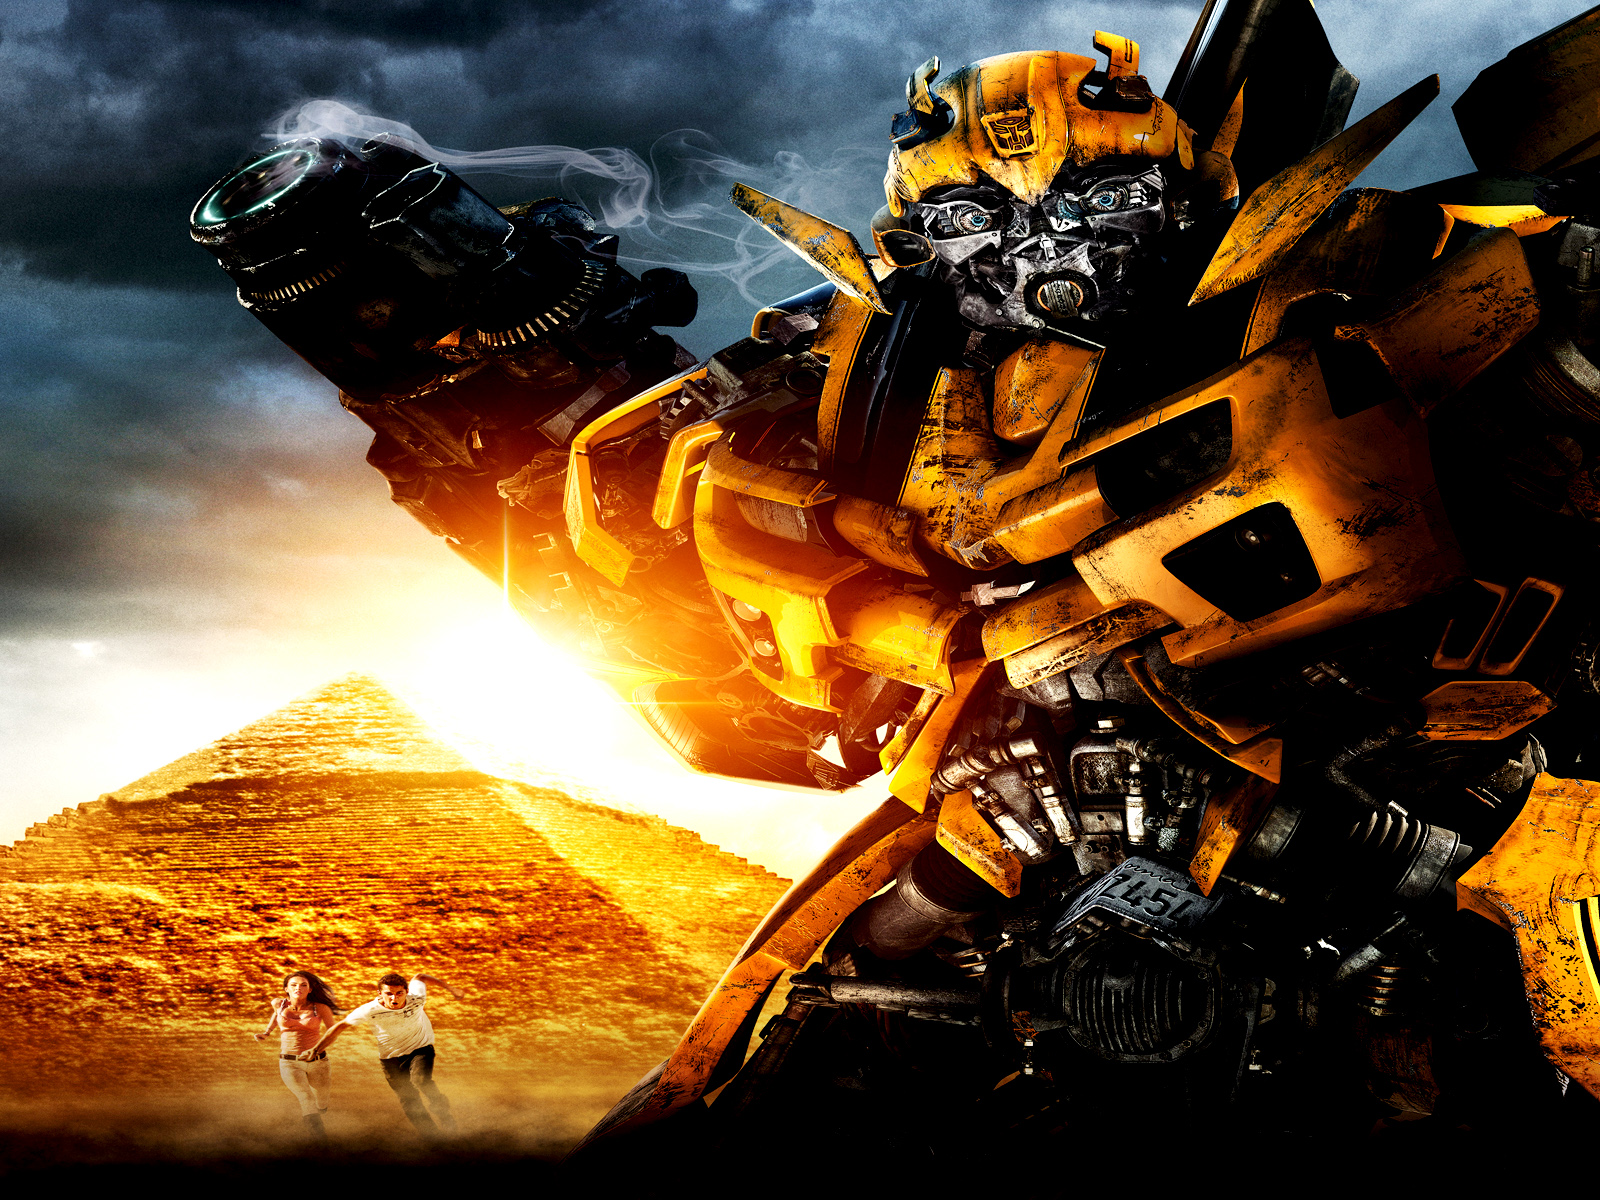 Wallpaper Robot Bumblebee Transformers Bumblebee Movie Decepticon  Background  Download Free Image